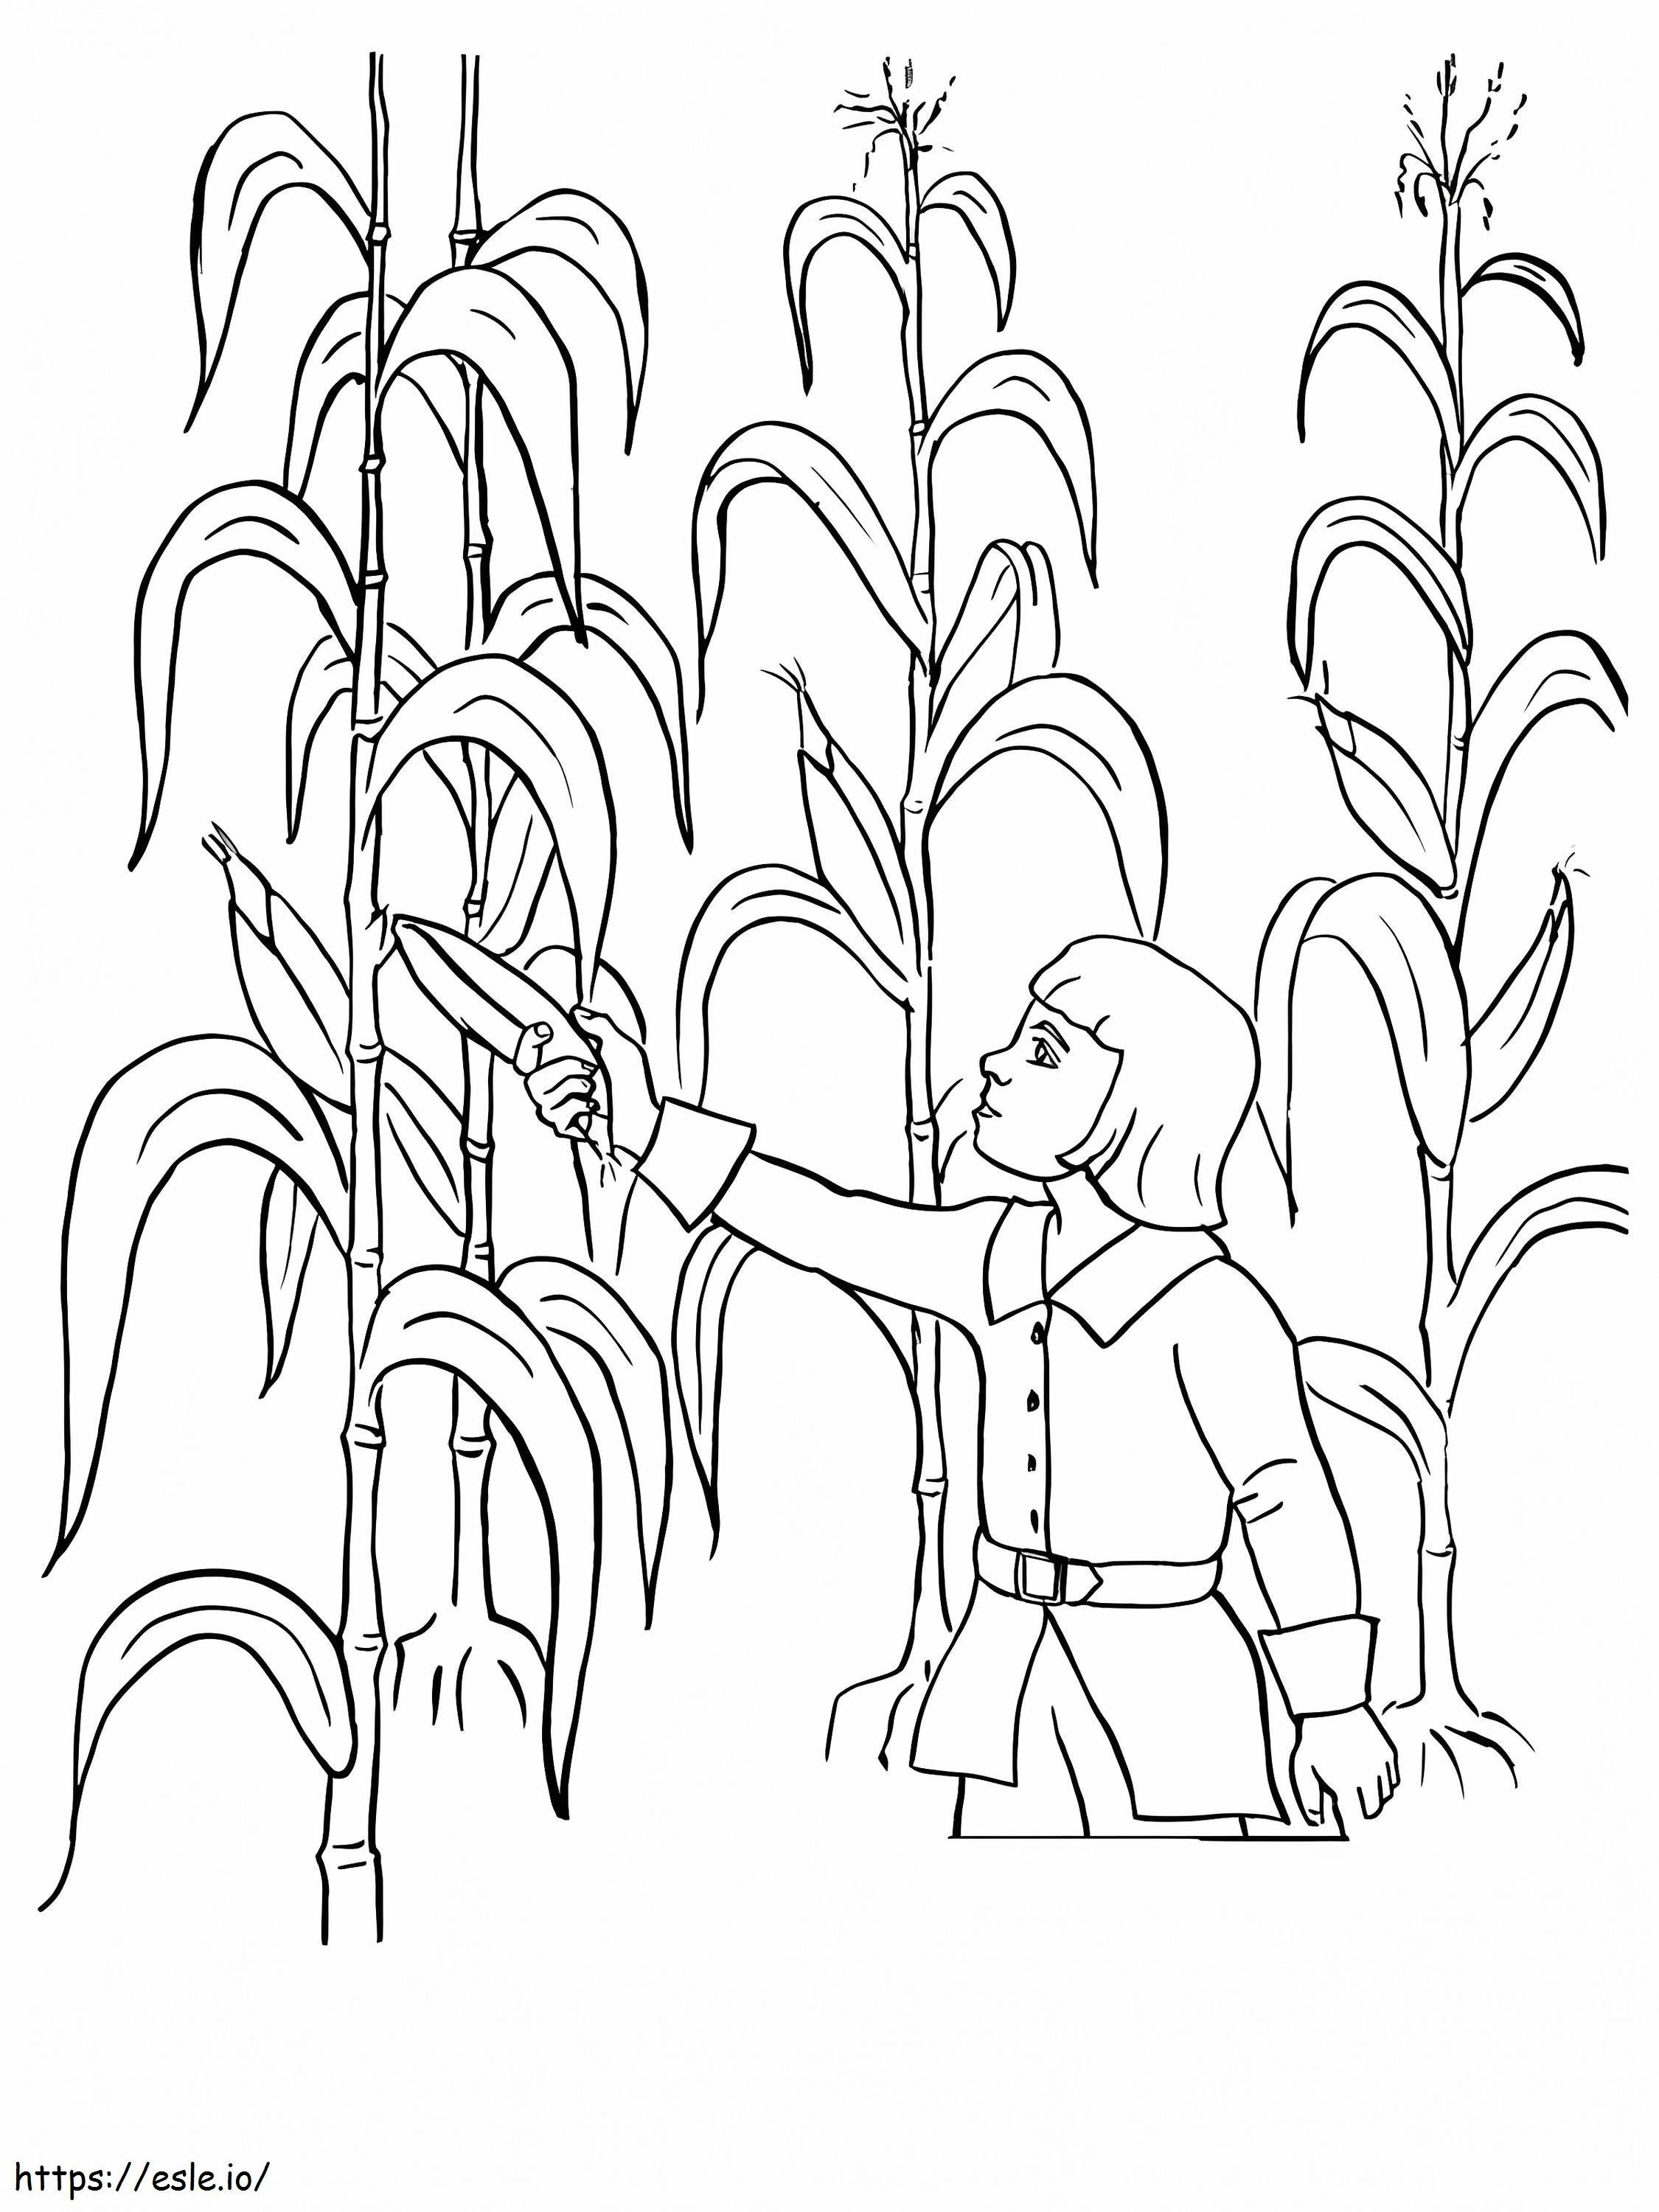 The Child Examines The Corn Husks For Coloring coloring page